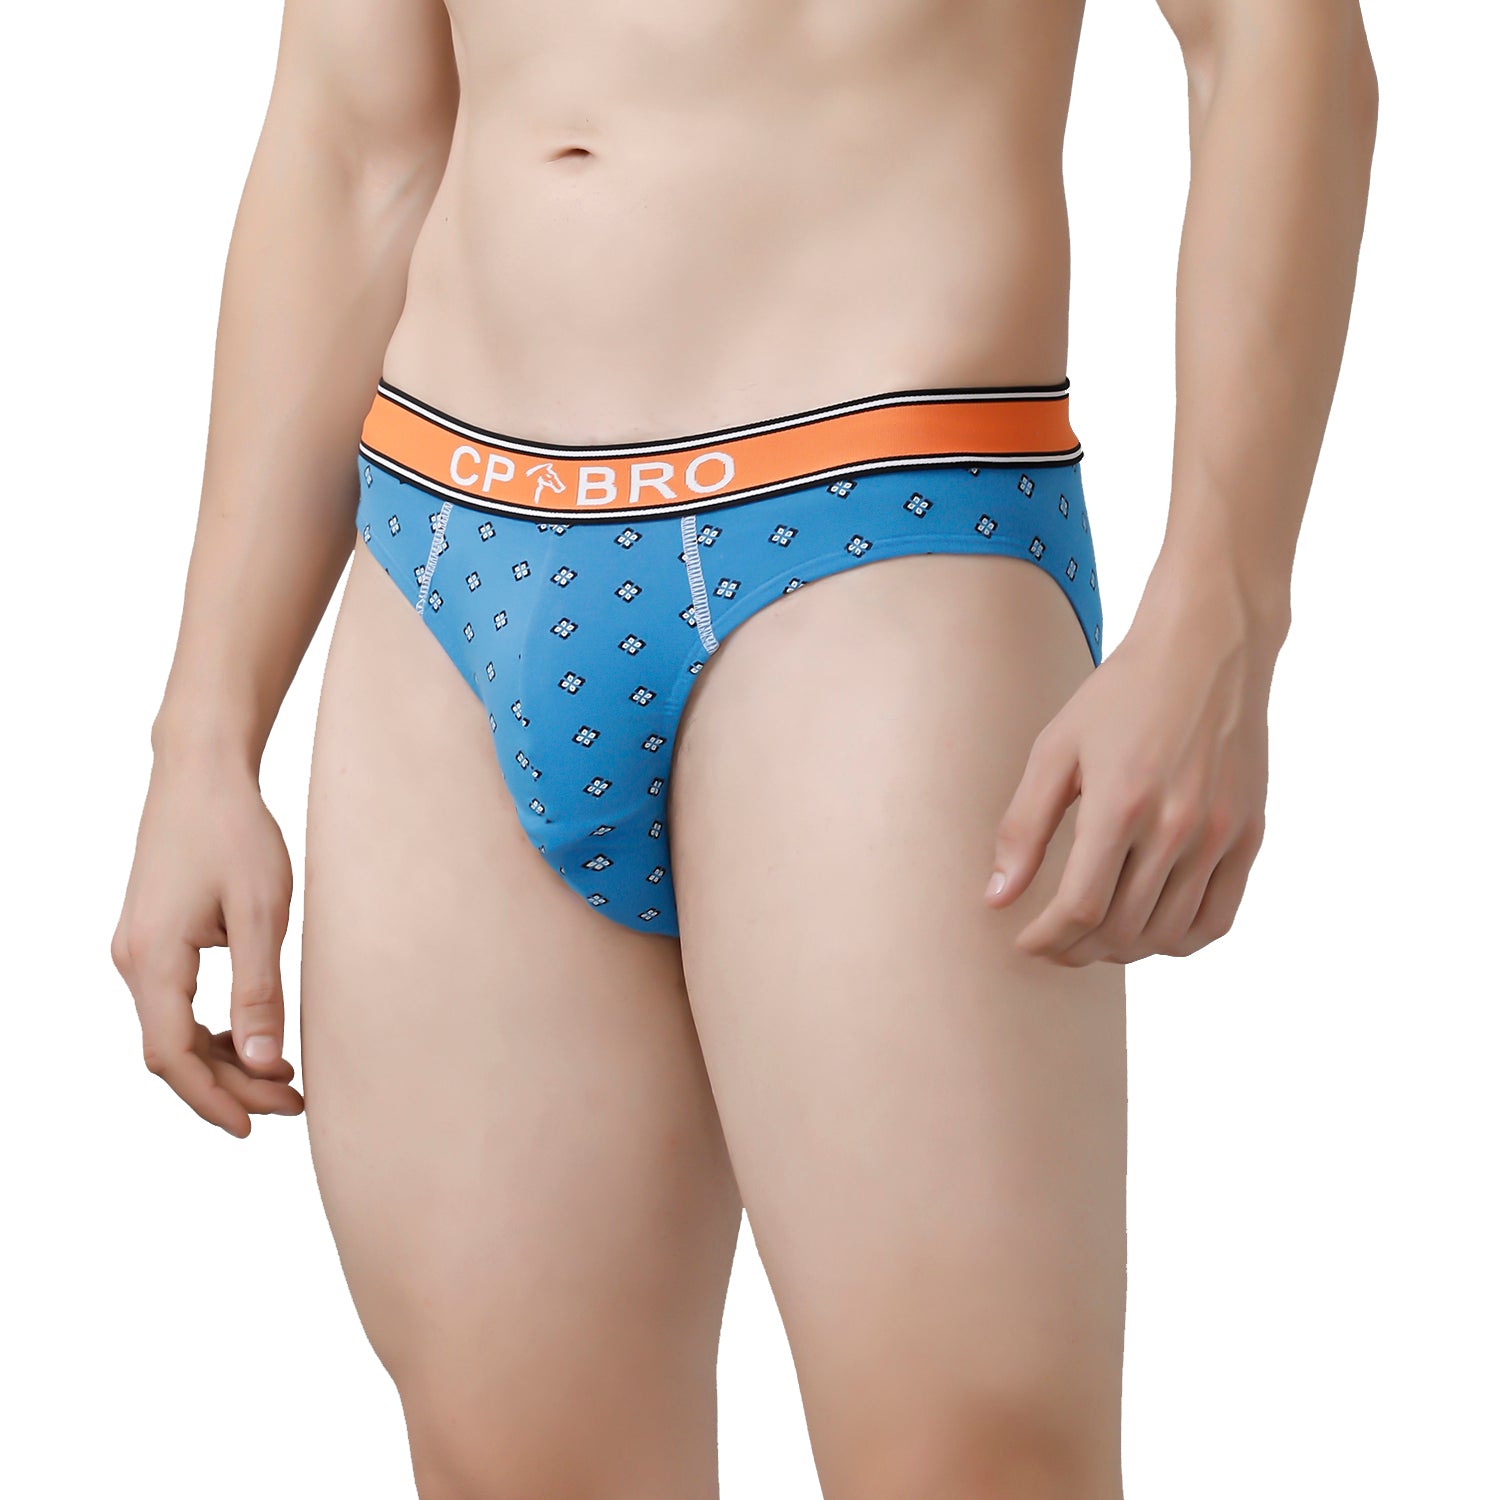 CP BRO Men's Printed Briefs with Exposed Waistband Value Pack - Blue & Grey Anchor (Pack of 2)